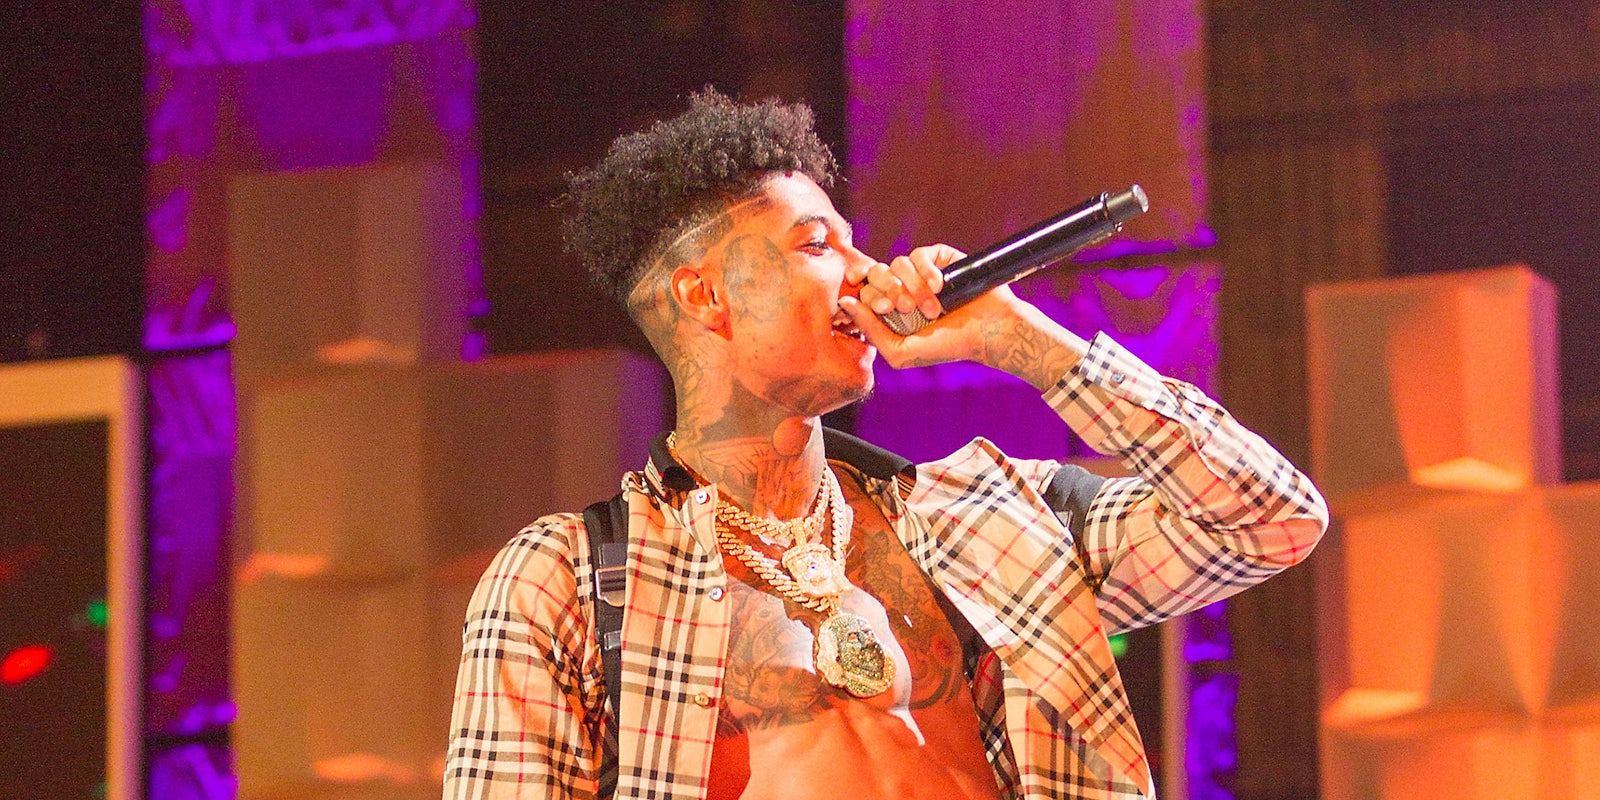 Blueface rapping onstage.